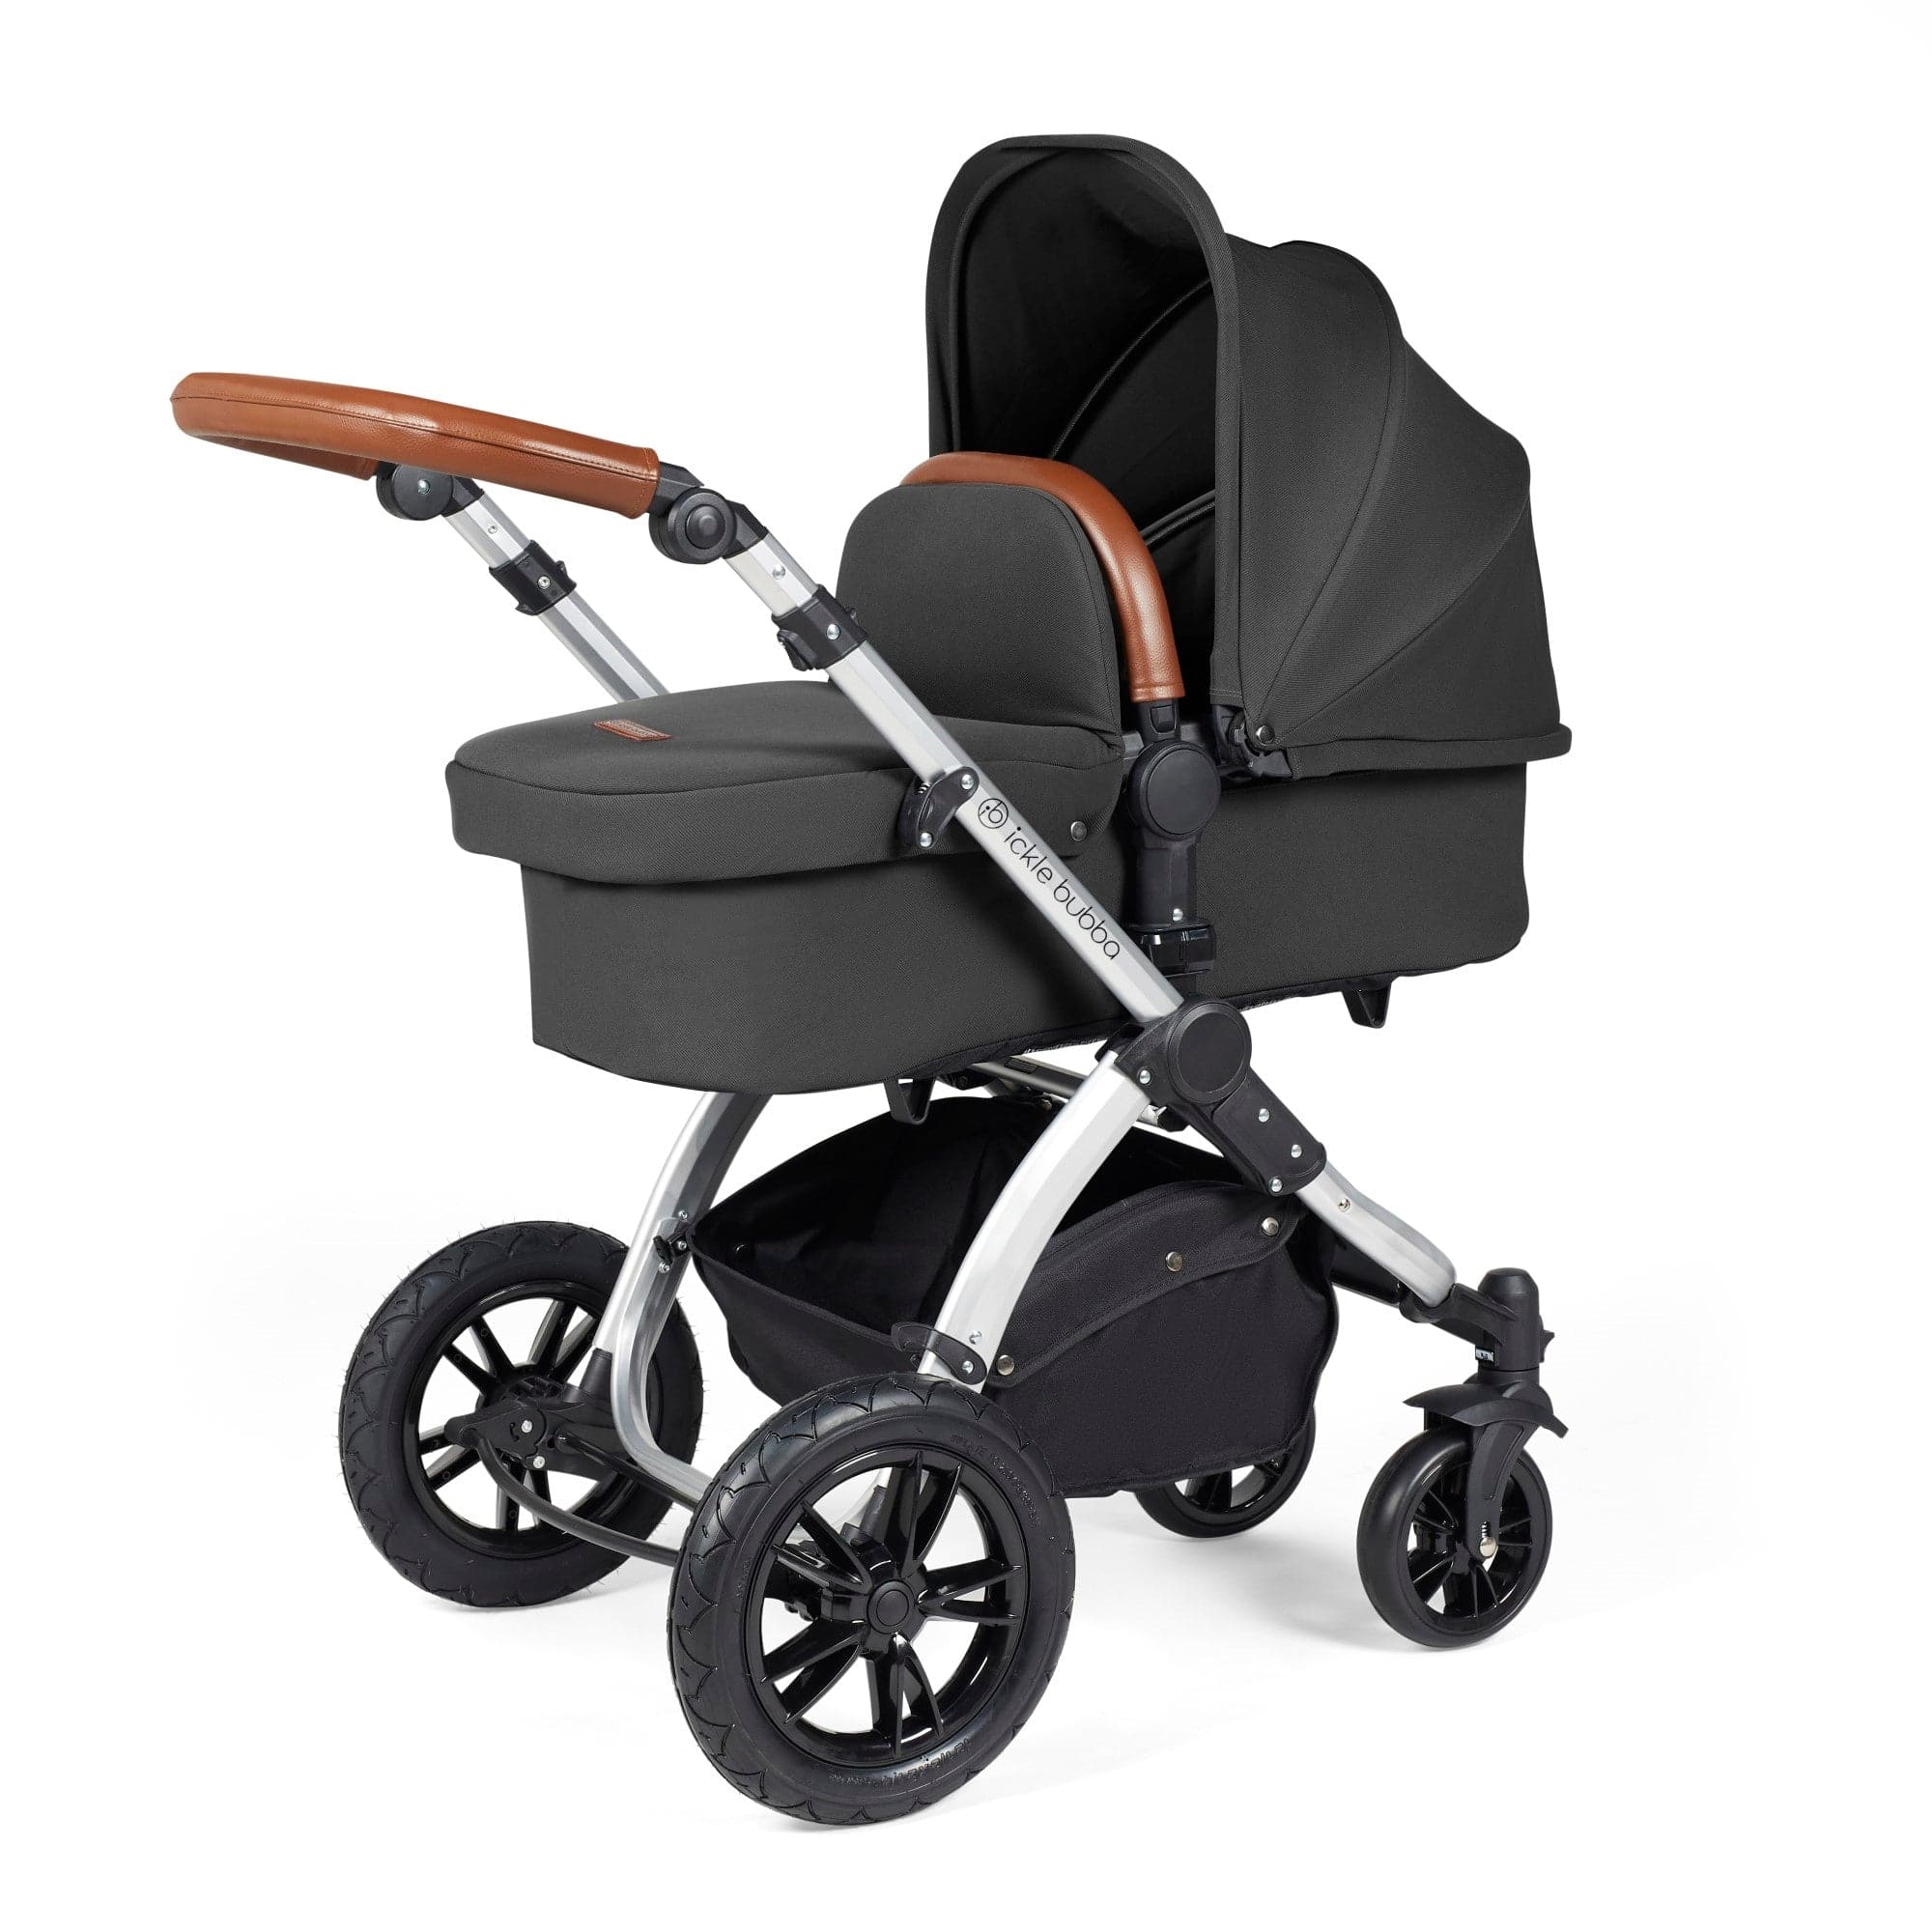 Ickle Bubba Stomp Luxe All-in-One I-Size Travel System With Isofix Base - Silver / Charcoal Grey / Tan   